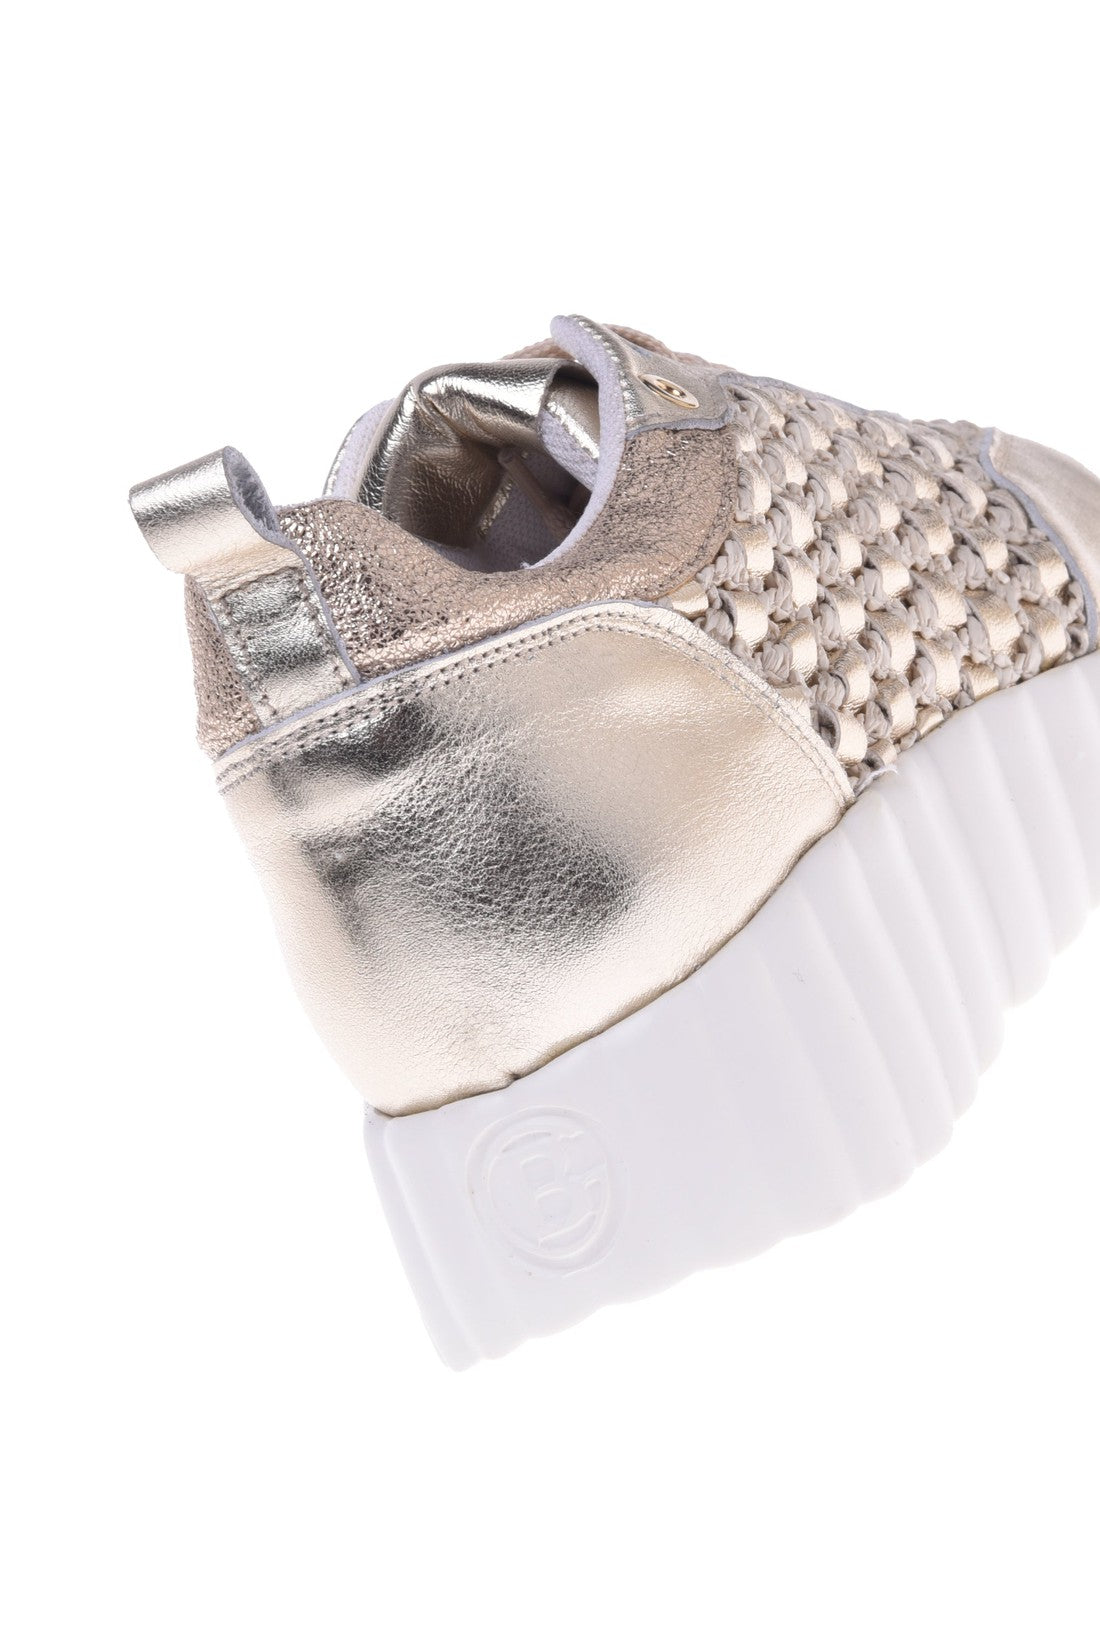 Sneaker in platinum and beige nappa leather and fabric